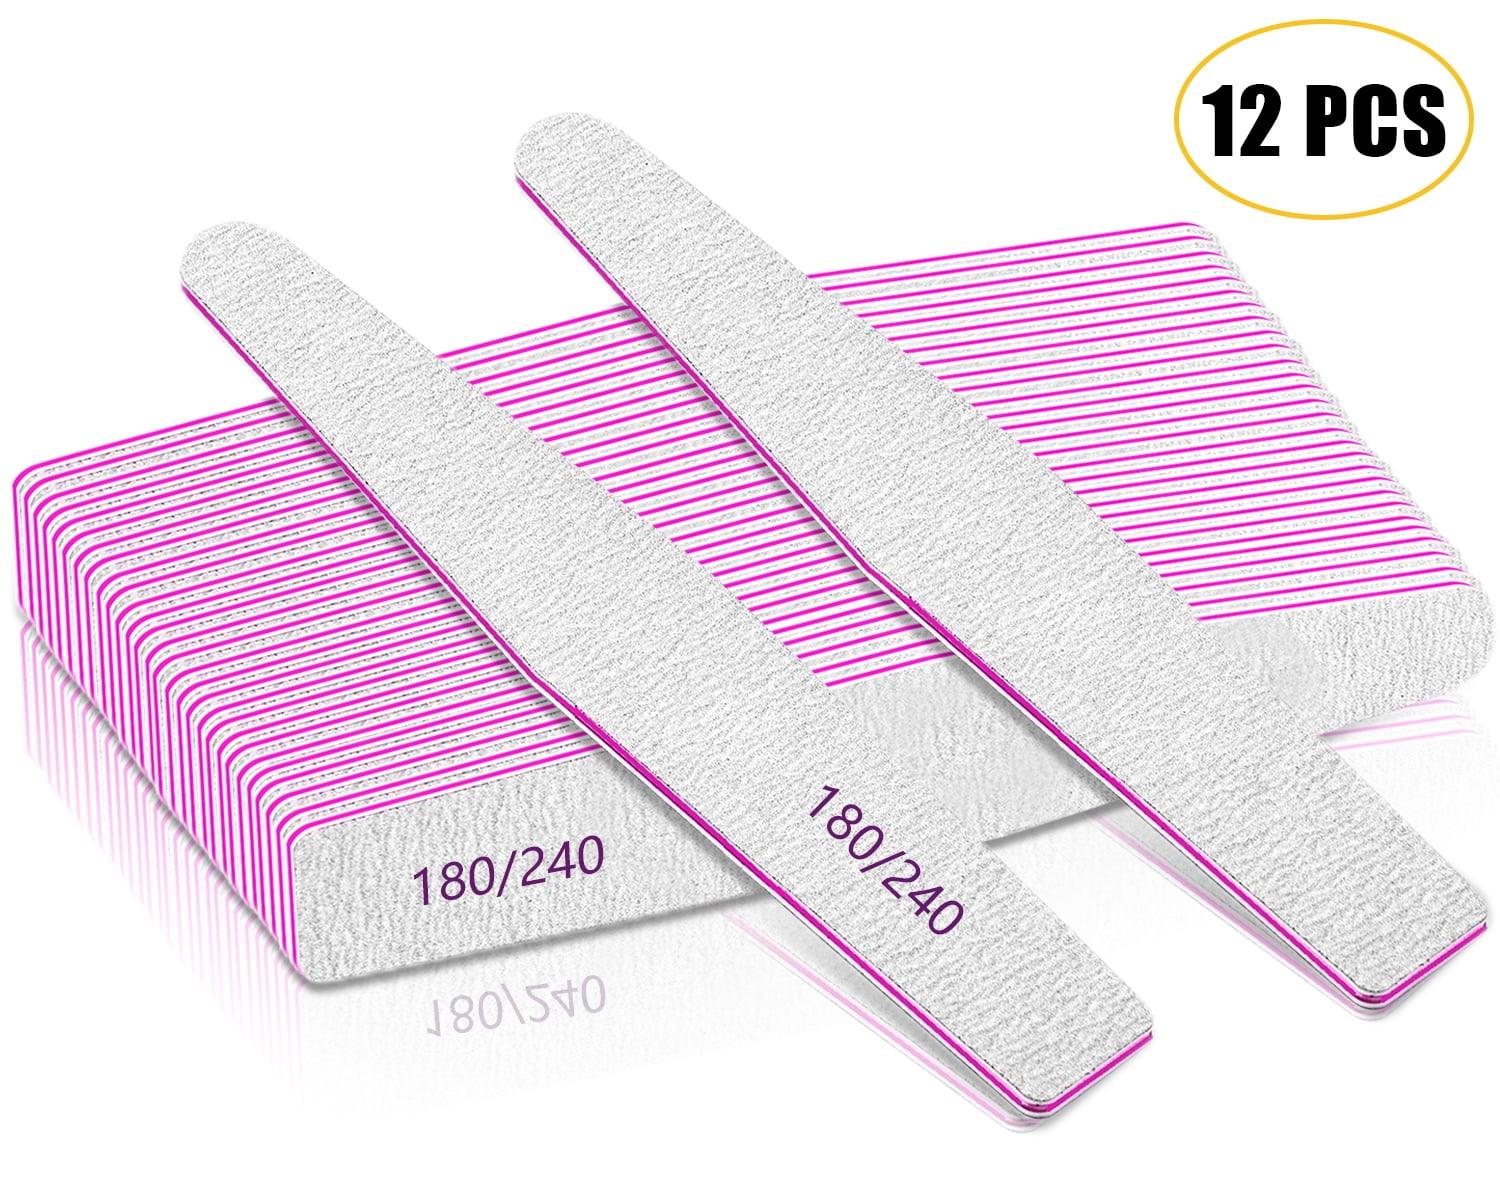 Nail File 180 240 Grit 12 PCS Double Sided Emery Boards Nail Files for Acrylic Nails and Poly Nail Extension Gel Washable 5300febd 4ad3 406e ad97 4a13c7fb50fe.b60ba4f896d8b33f237be7f9edff3fc5